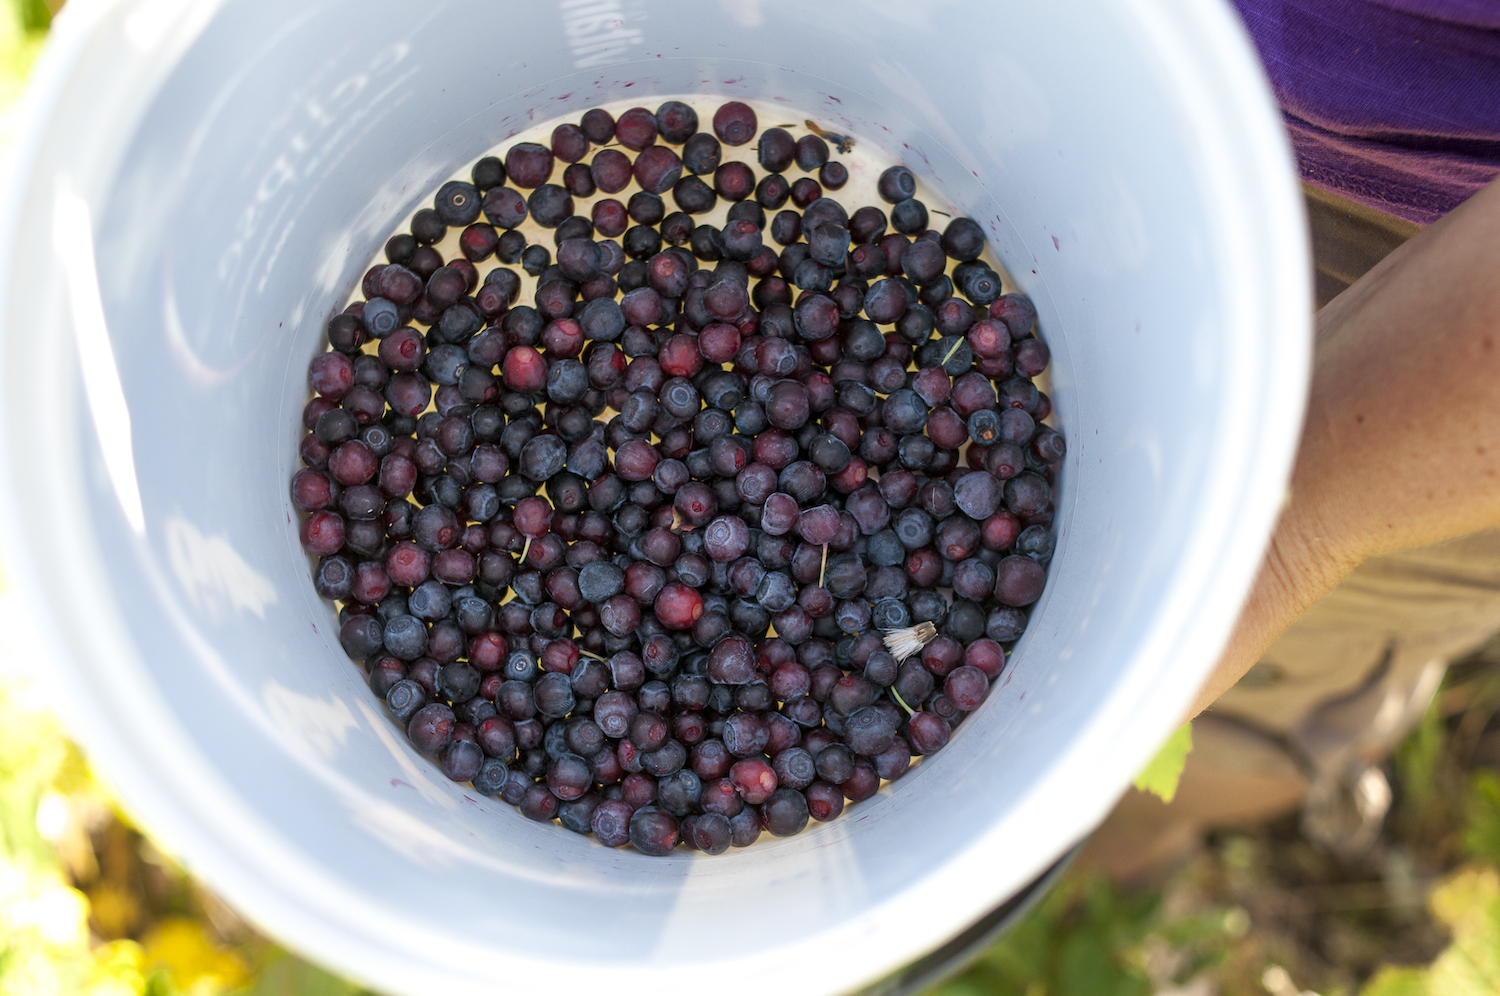 Idaho huckleberries harvested by the Coeur d’Alene Tribe in Idaho.